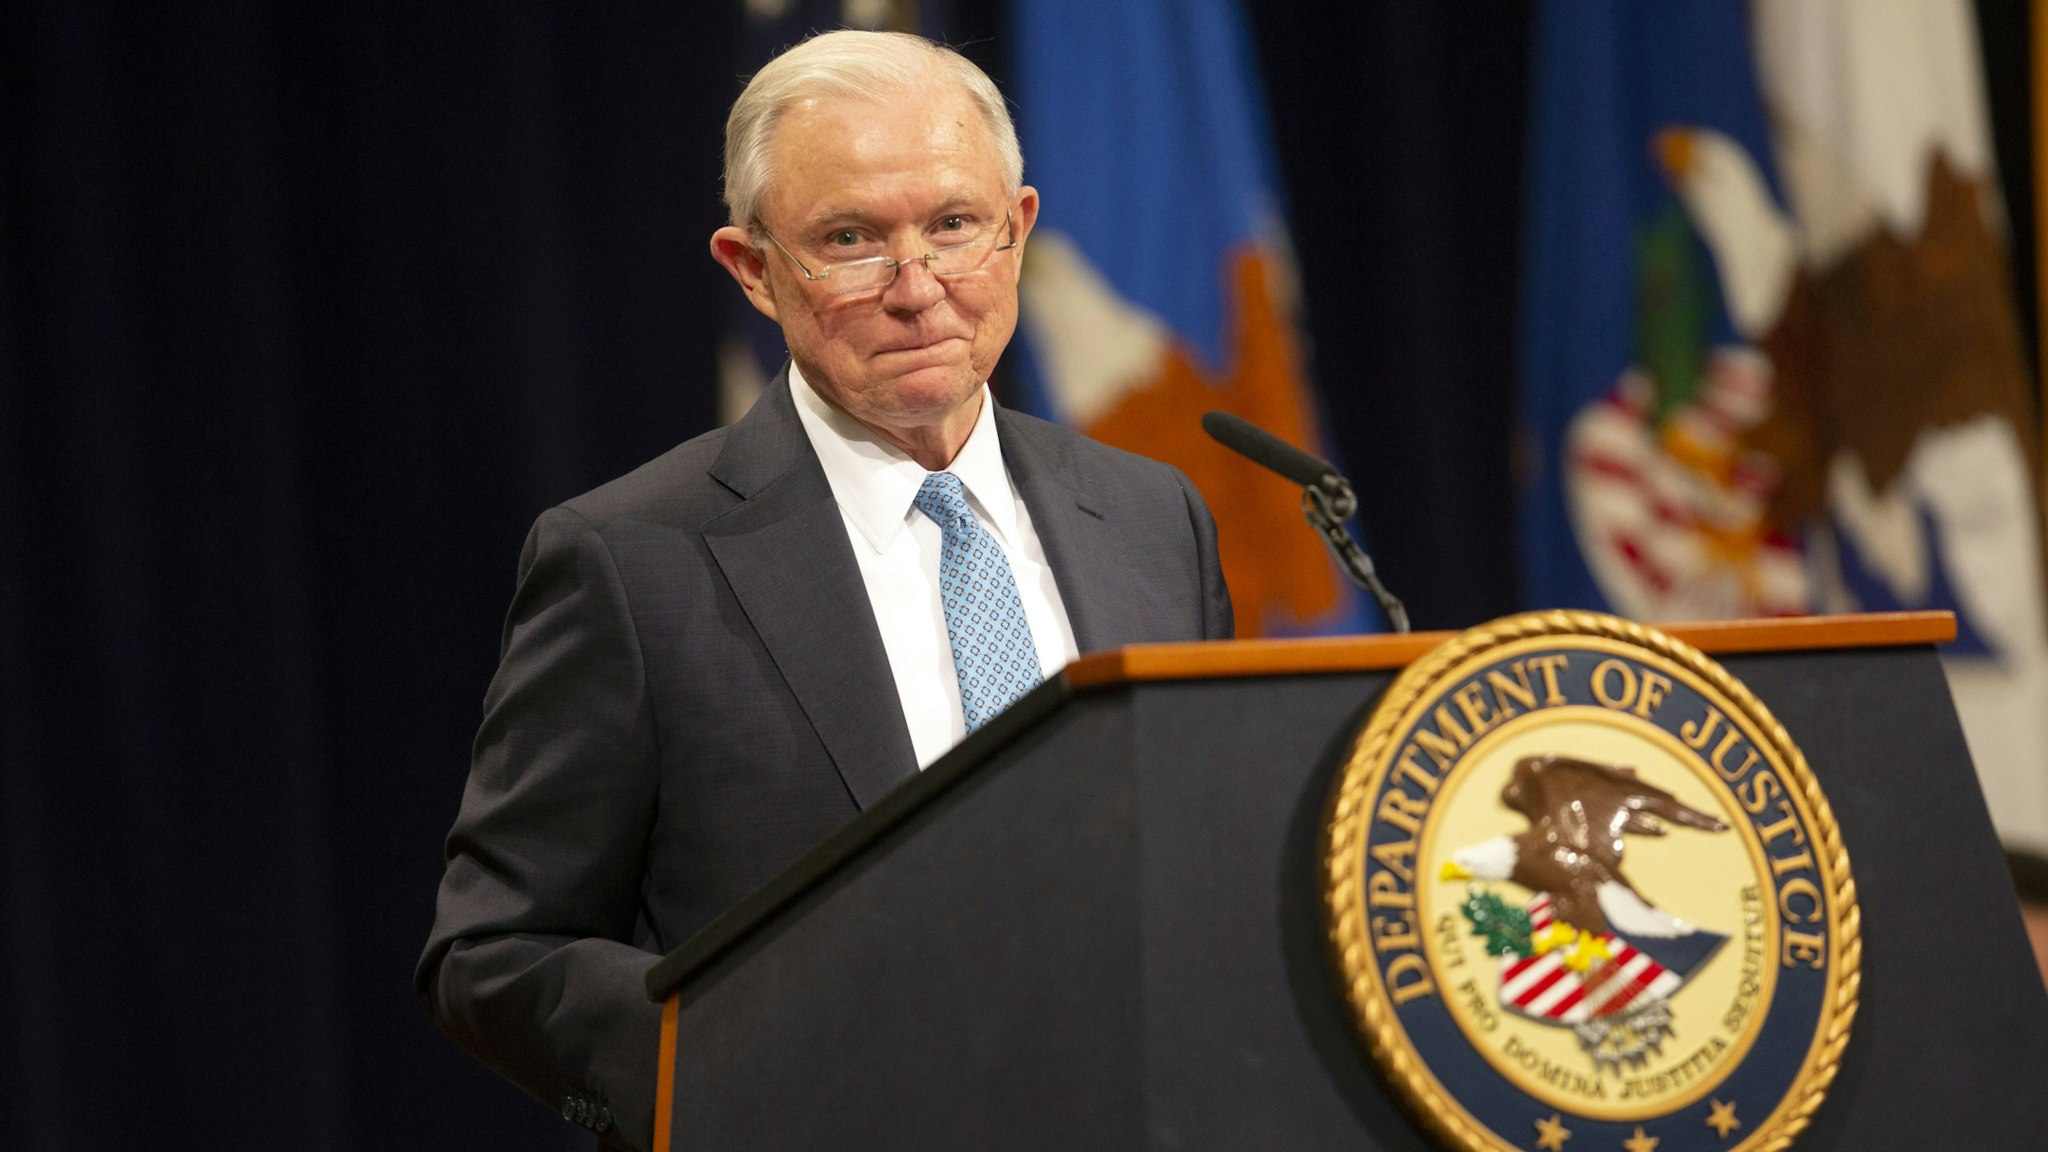 Jeff Sessions, U.S. former attorney general, speaks during a farewell ceremony for Rod Rosenstein, deputy attorney general, in Washington D.C., U.S., on Thursday, May 9, 2019. Rosenstein's exit from the Justice Department caps a tenure marked by a tumultuous relationship with President Donald Trump.